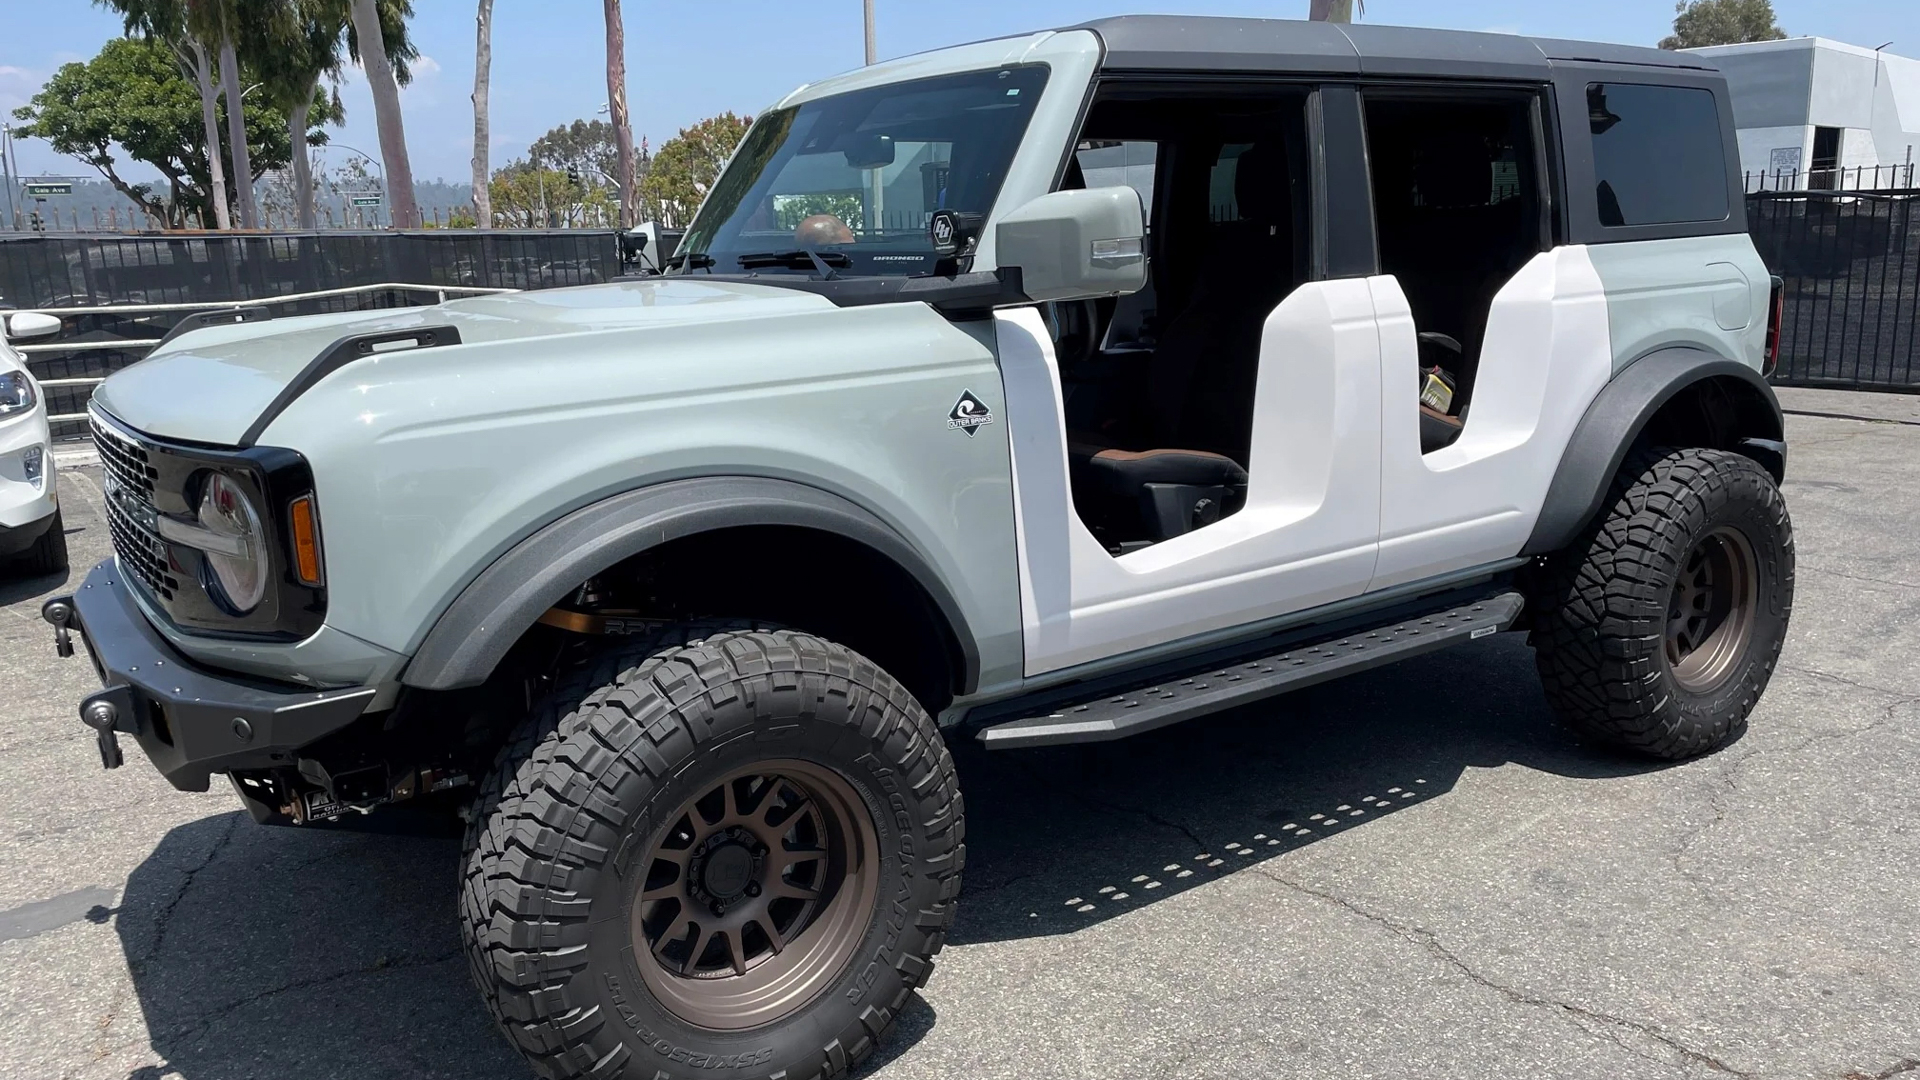 Classic Roadster Doors Are Coming Back on the New Ford Bronco